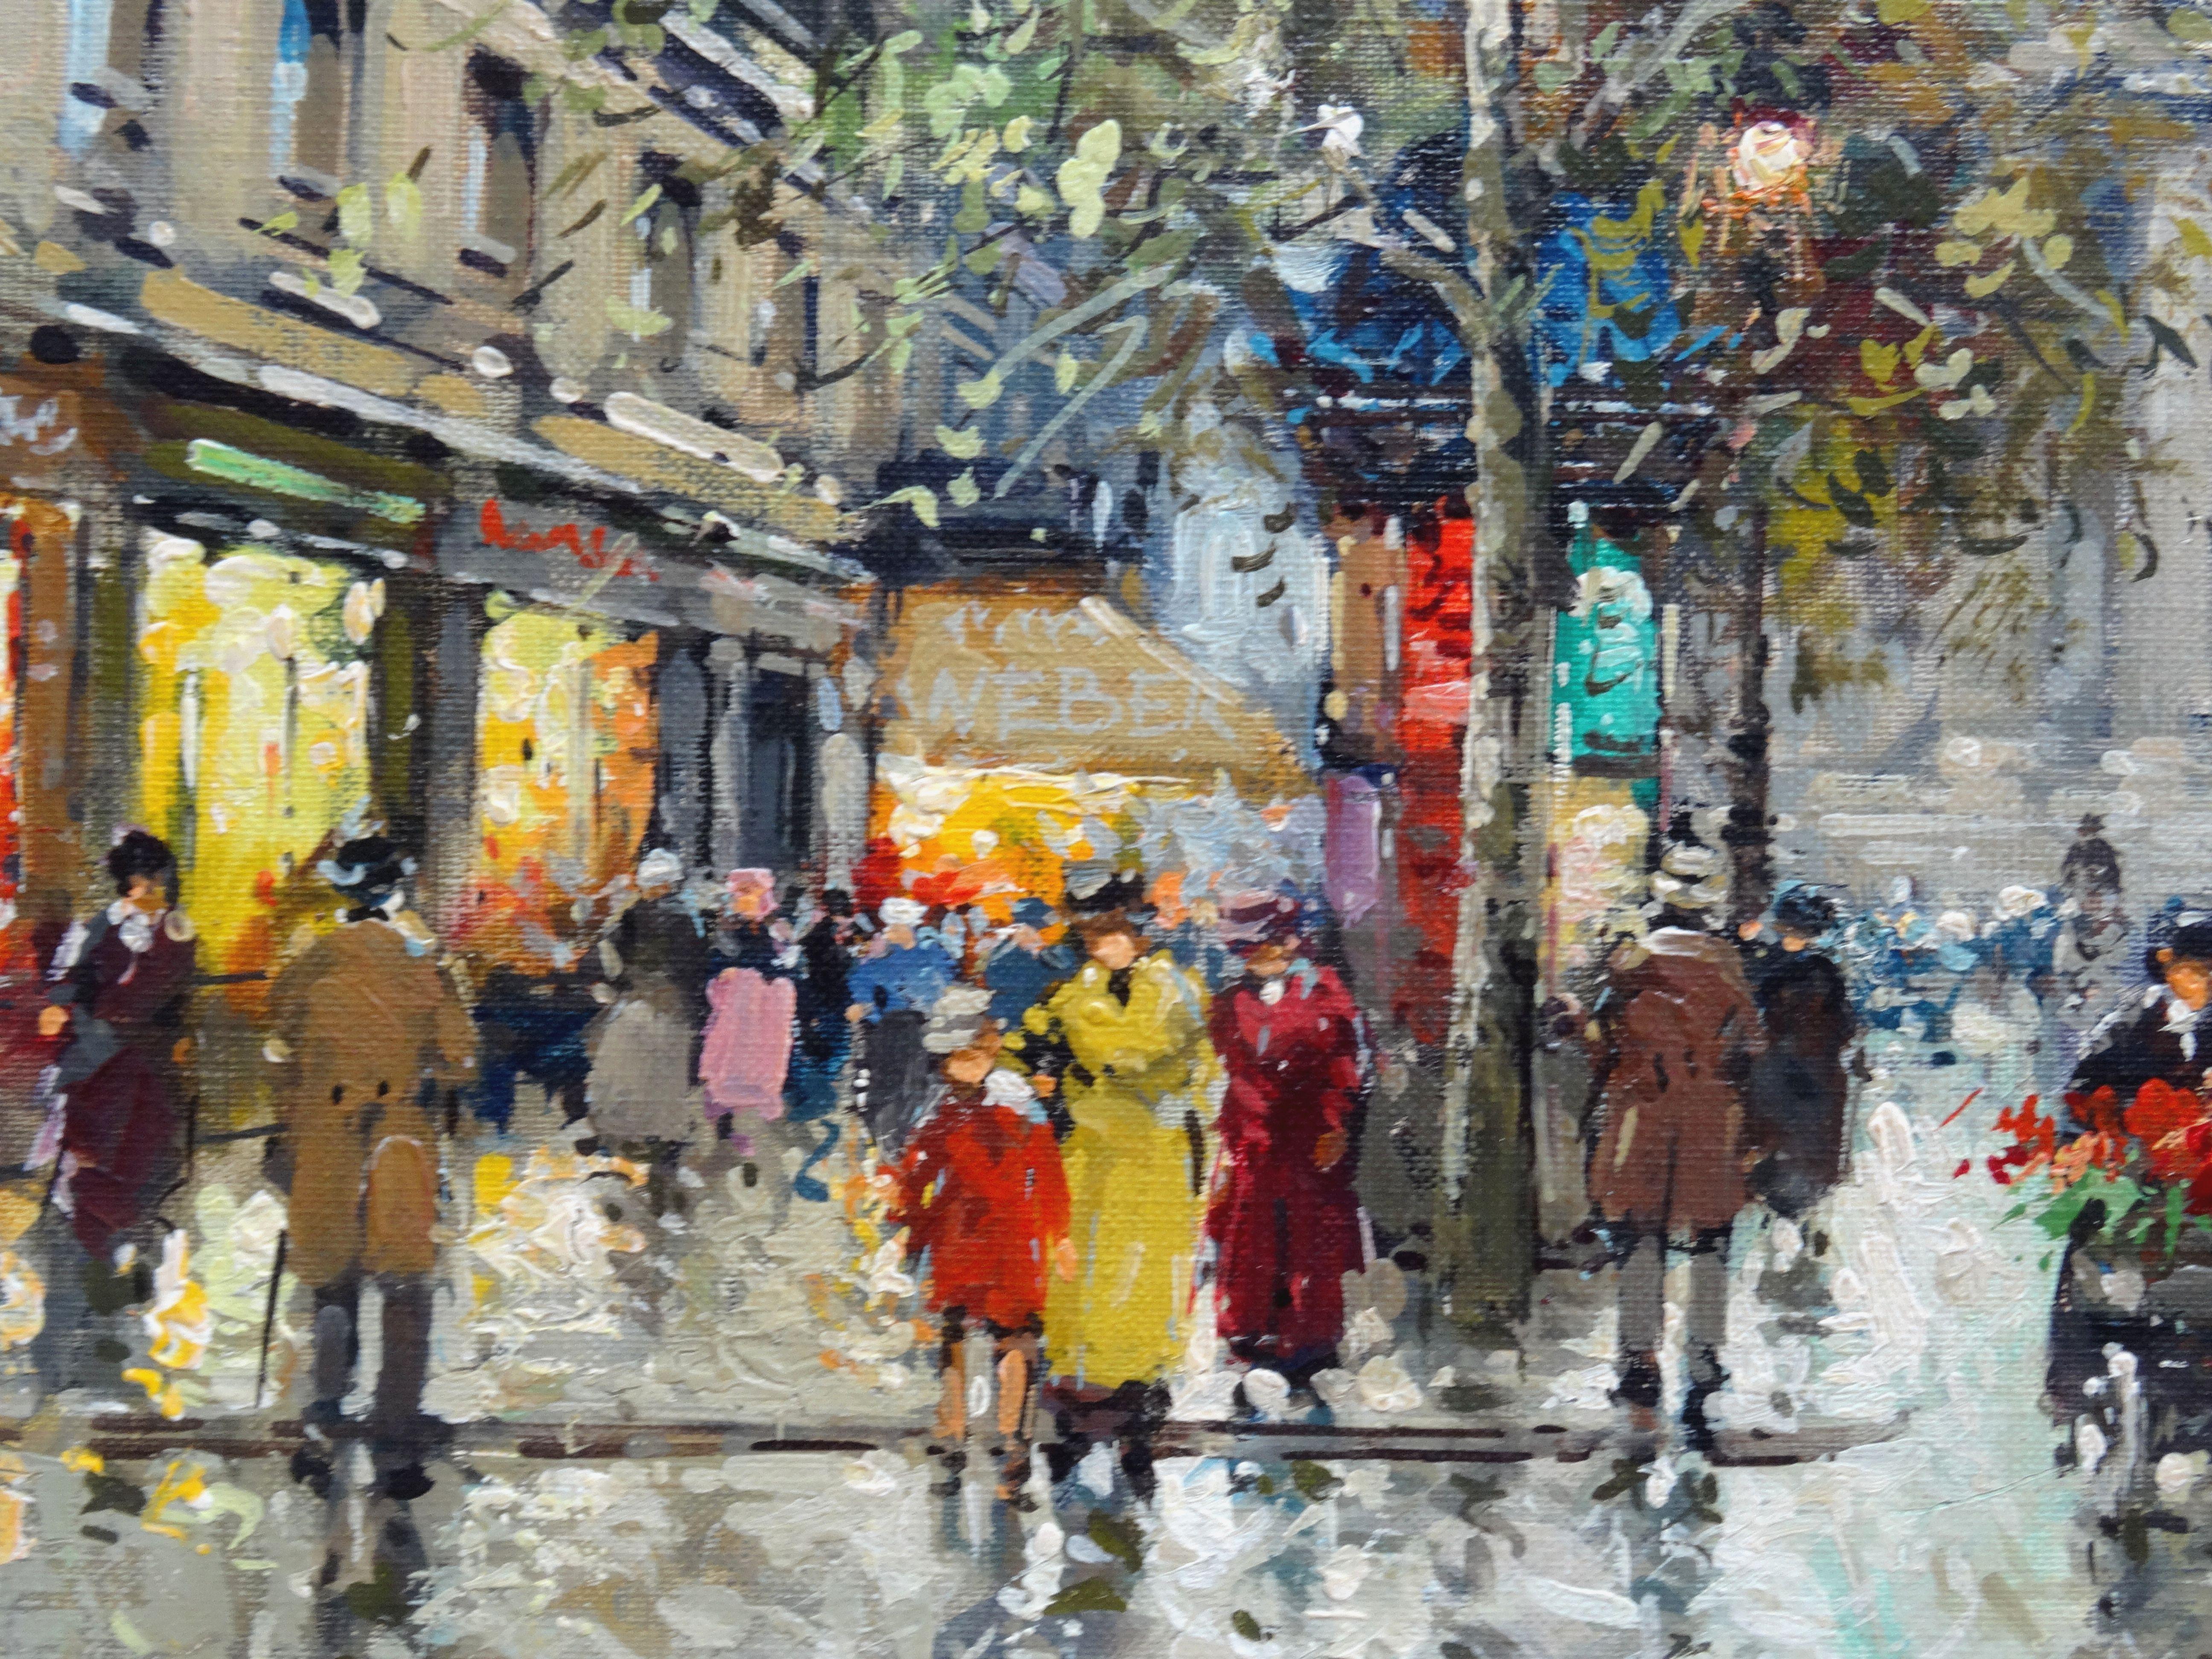 Parisian Street Scene. Oil on canvas, 32x46 cm - Expressionist Painting by Antoine Blanchard